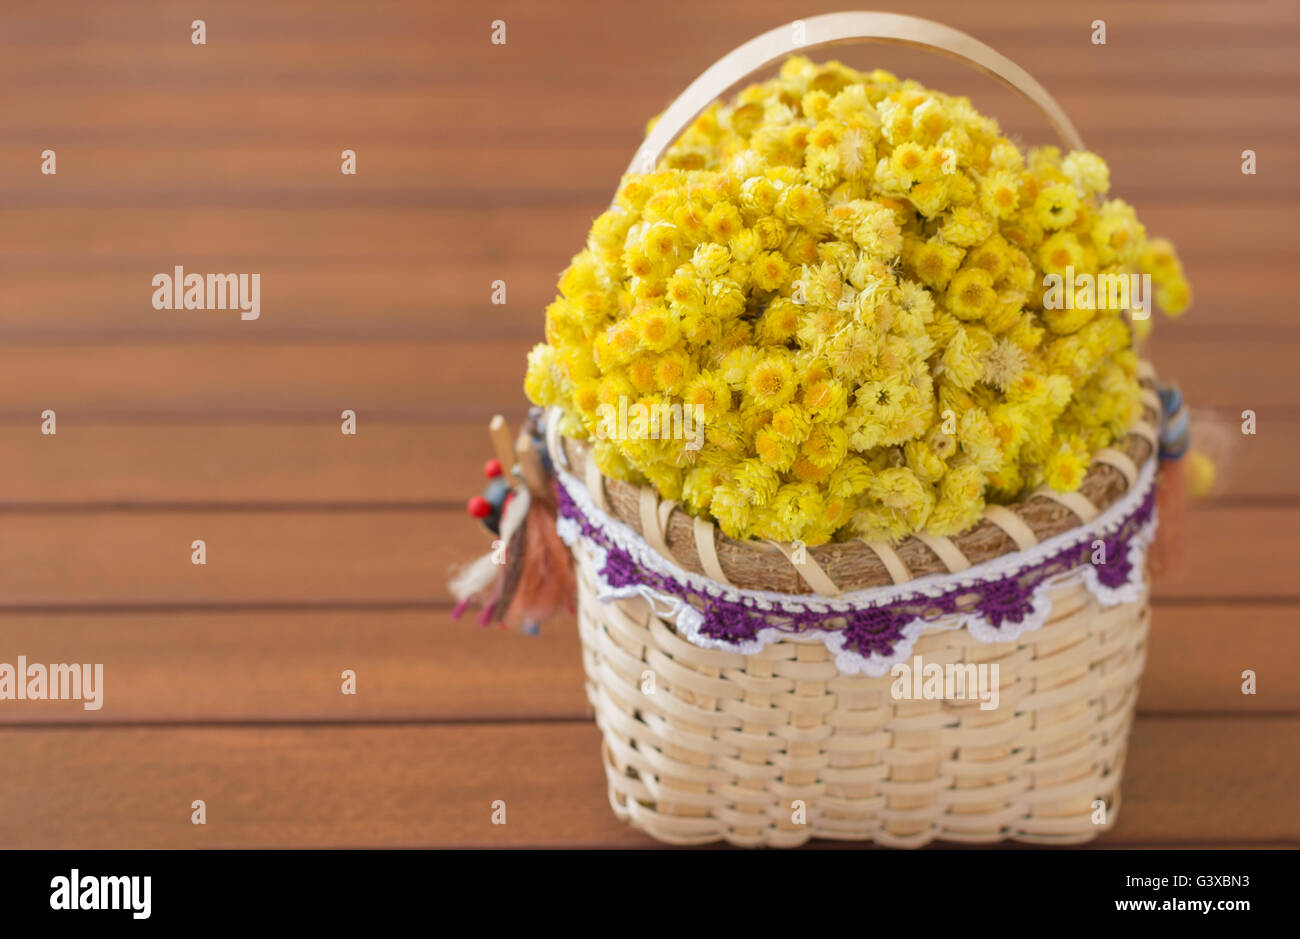 A basket containing helichrysum on wooden table. Stock Photo